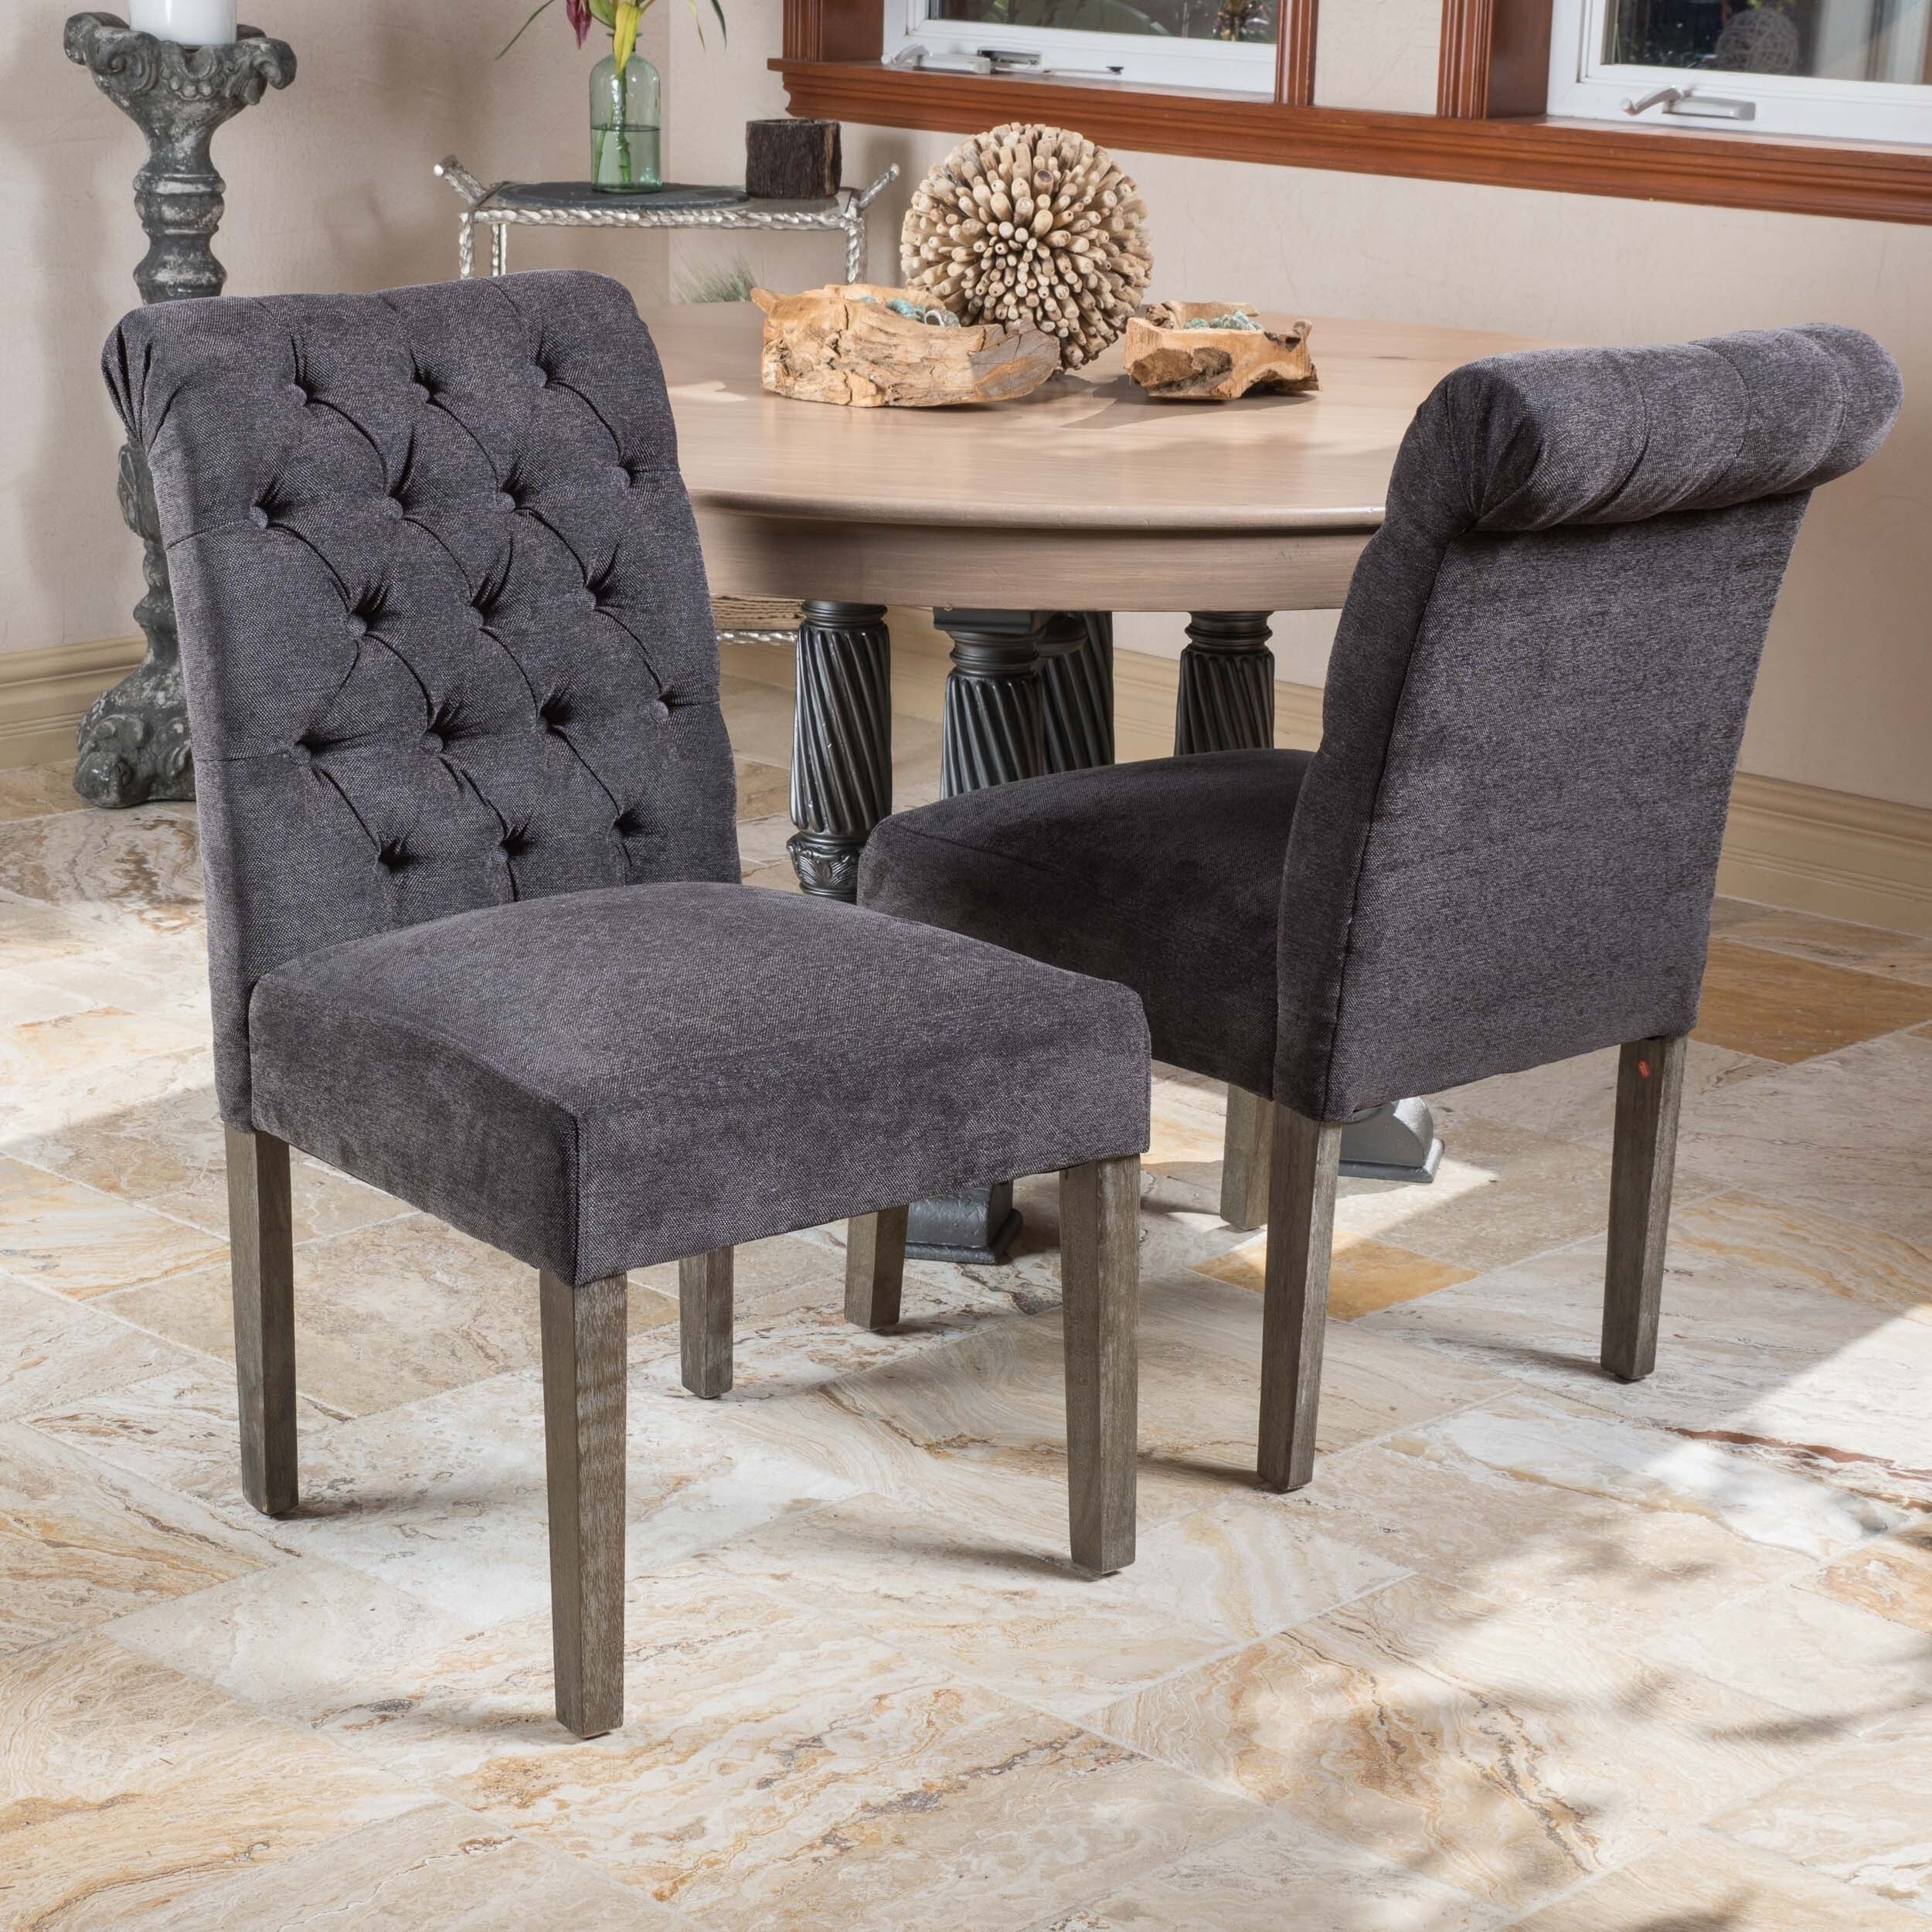 Christopher Knight Home Dinah Dark Grey Dining Chairs (Set of 2) Today